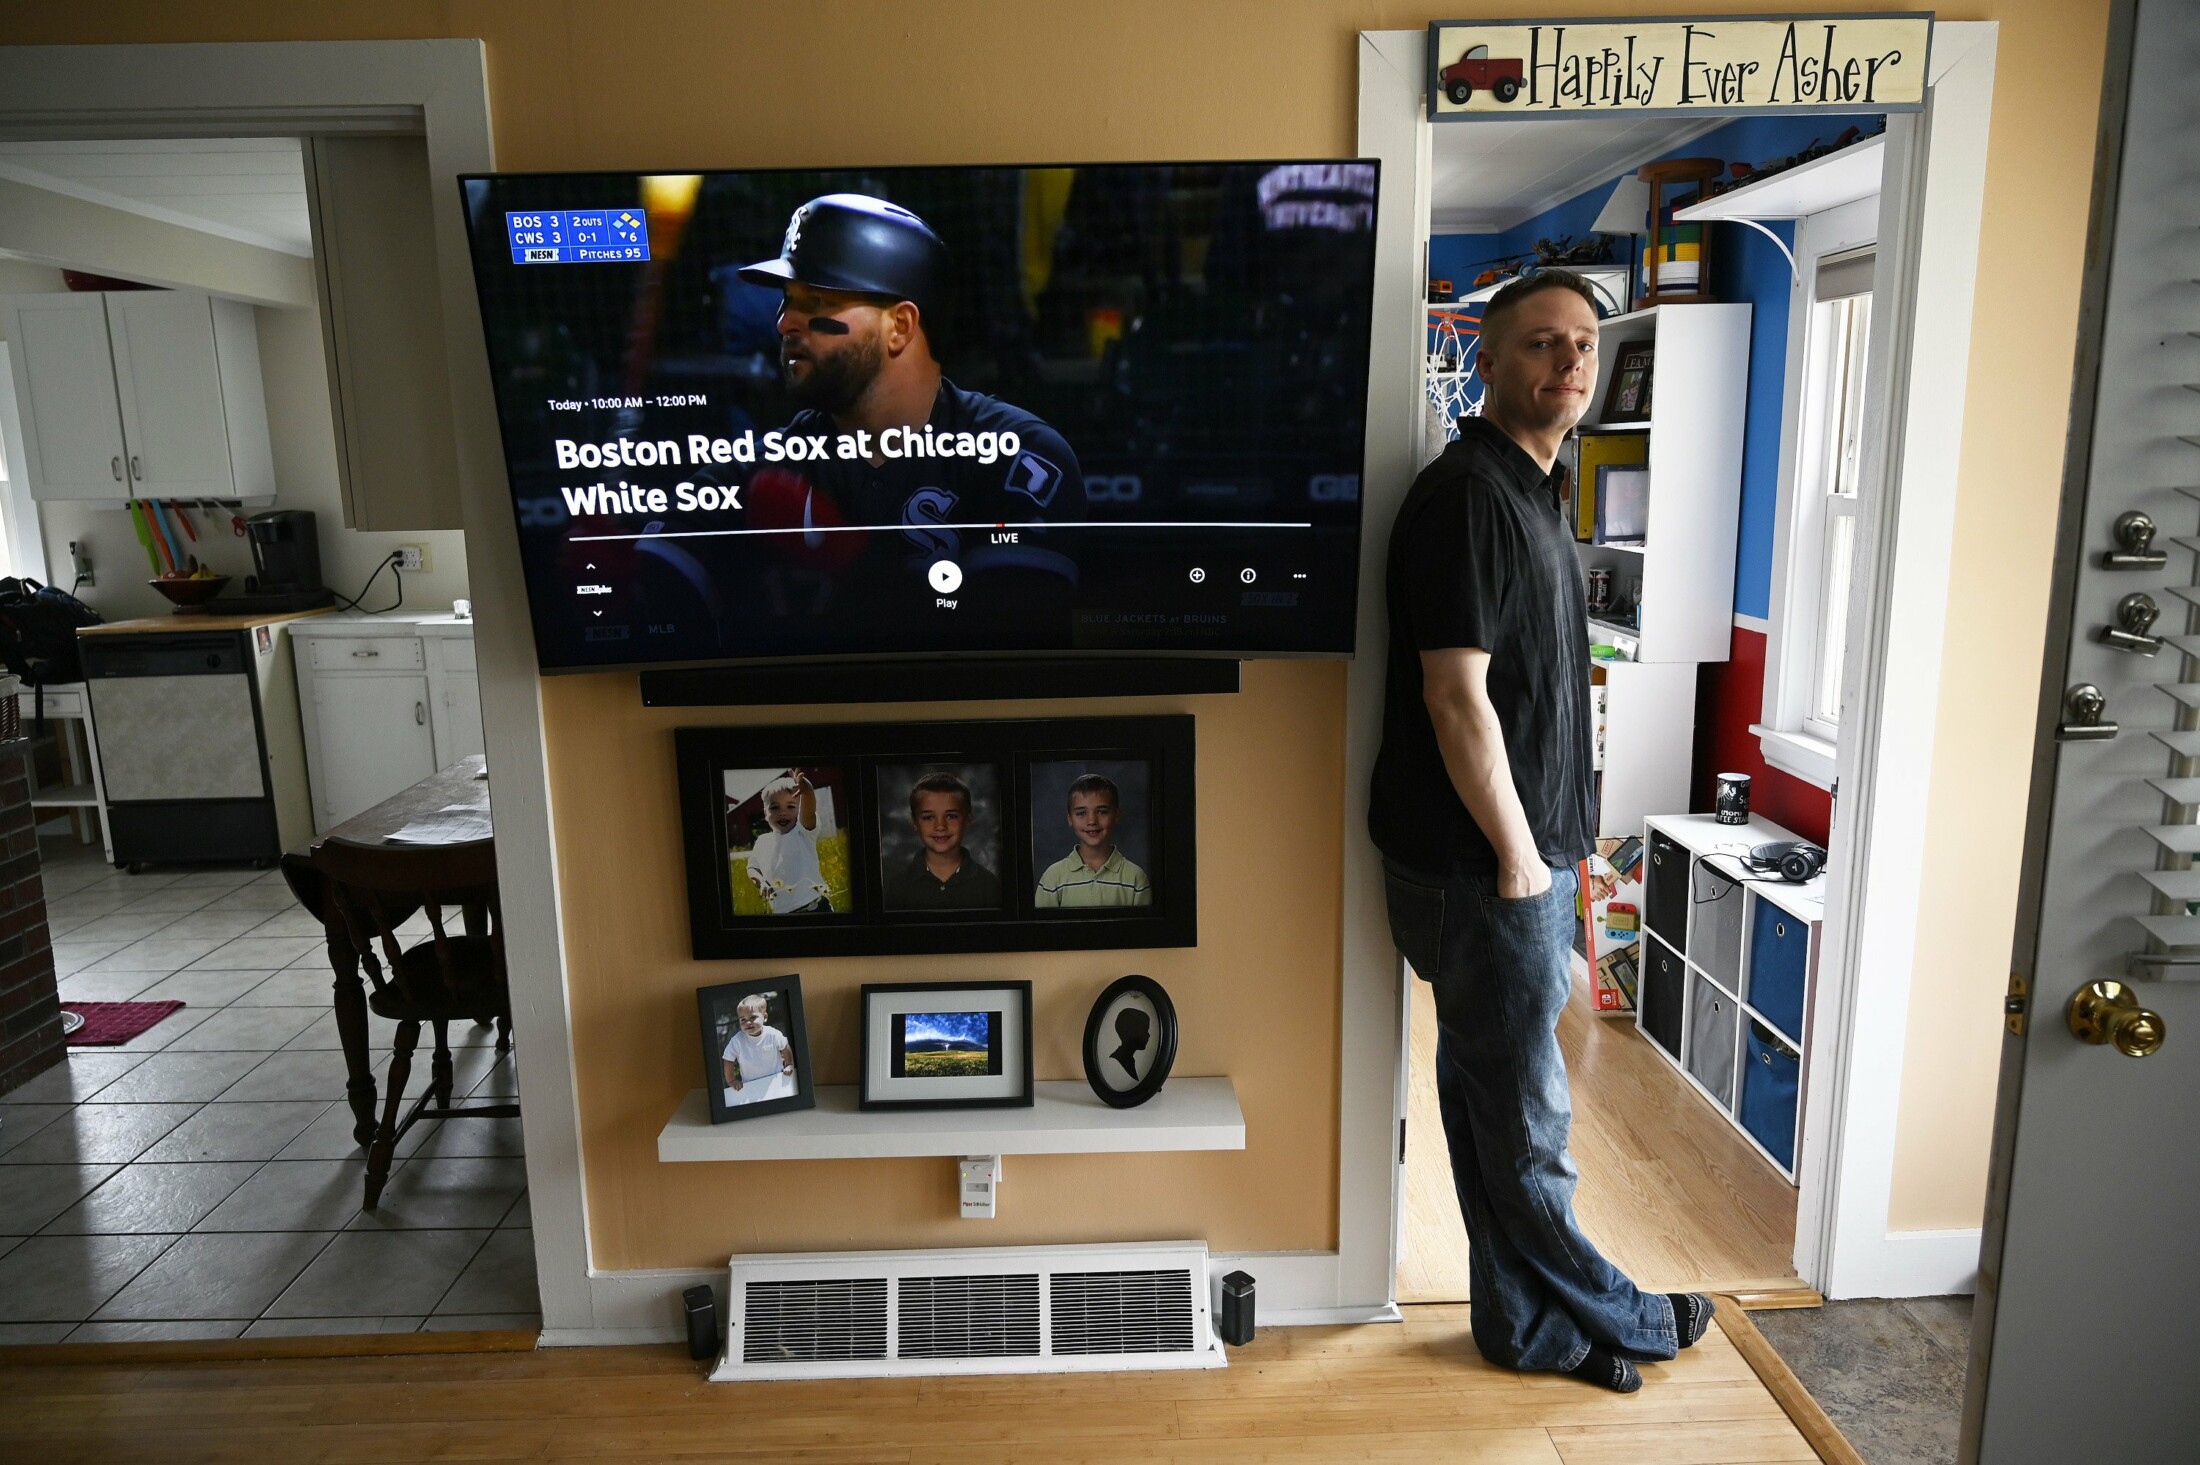 For sports fans, more streaming options let them cut the cord